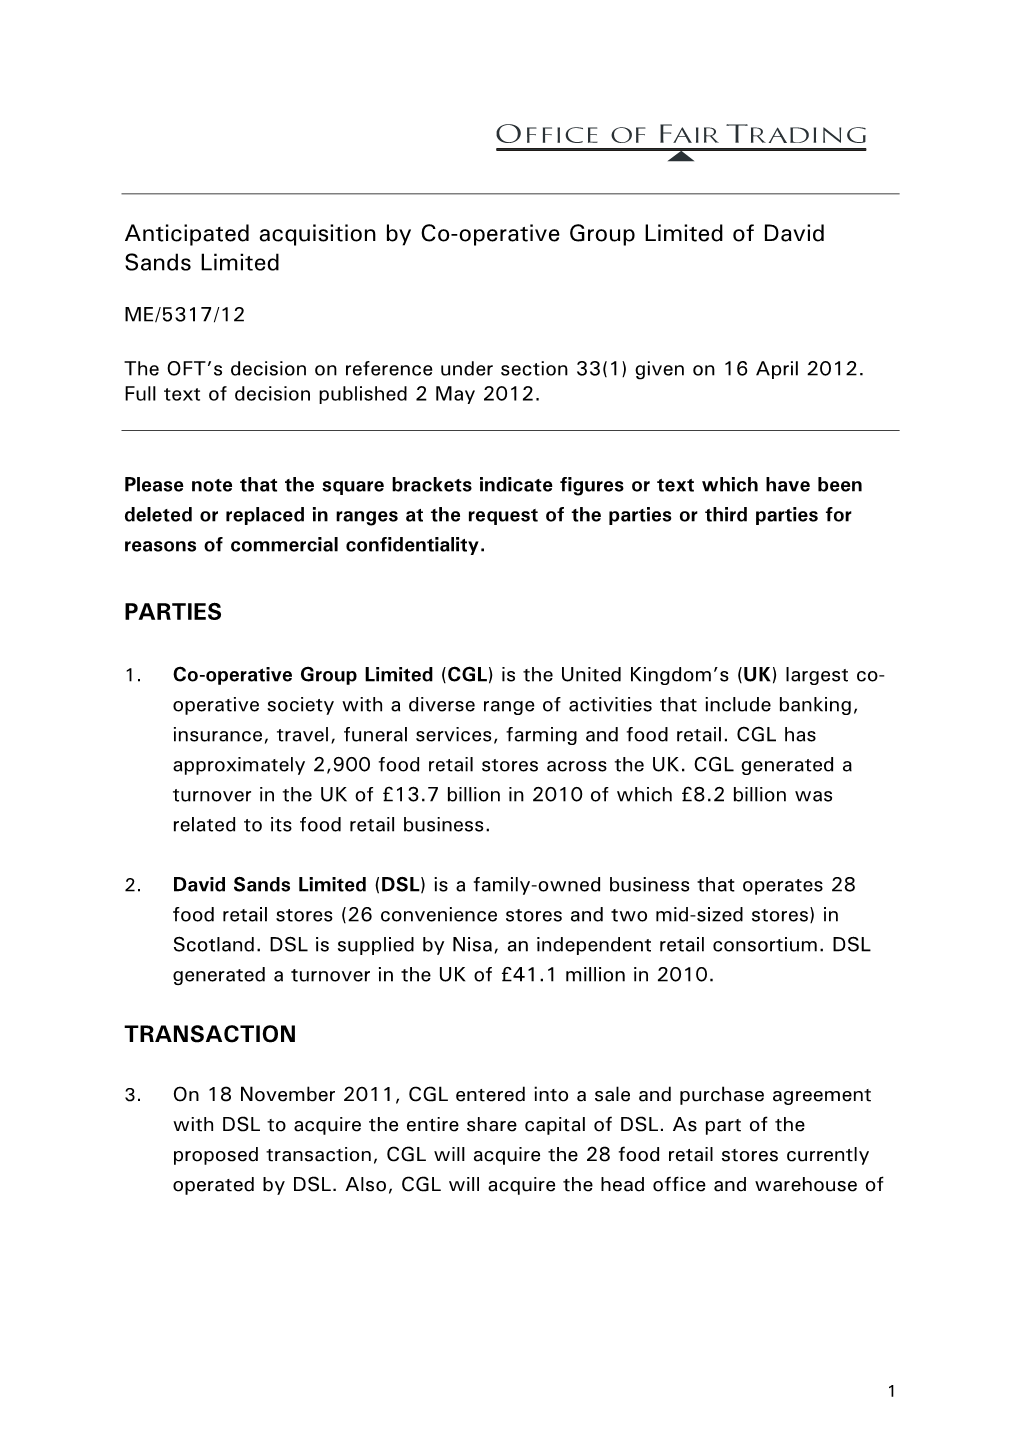 Anticipated Acquisition by Cooperative Group Limited of David Sands